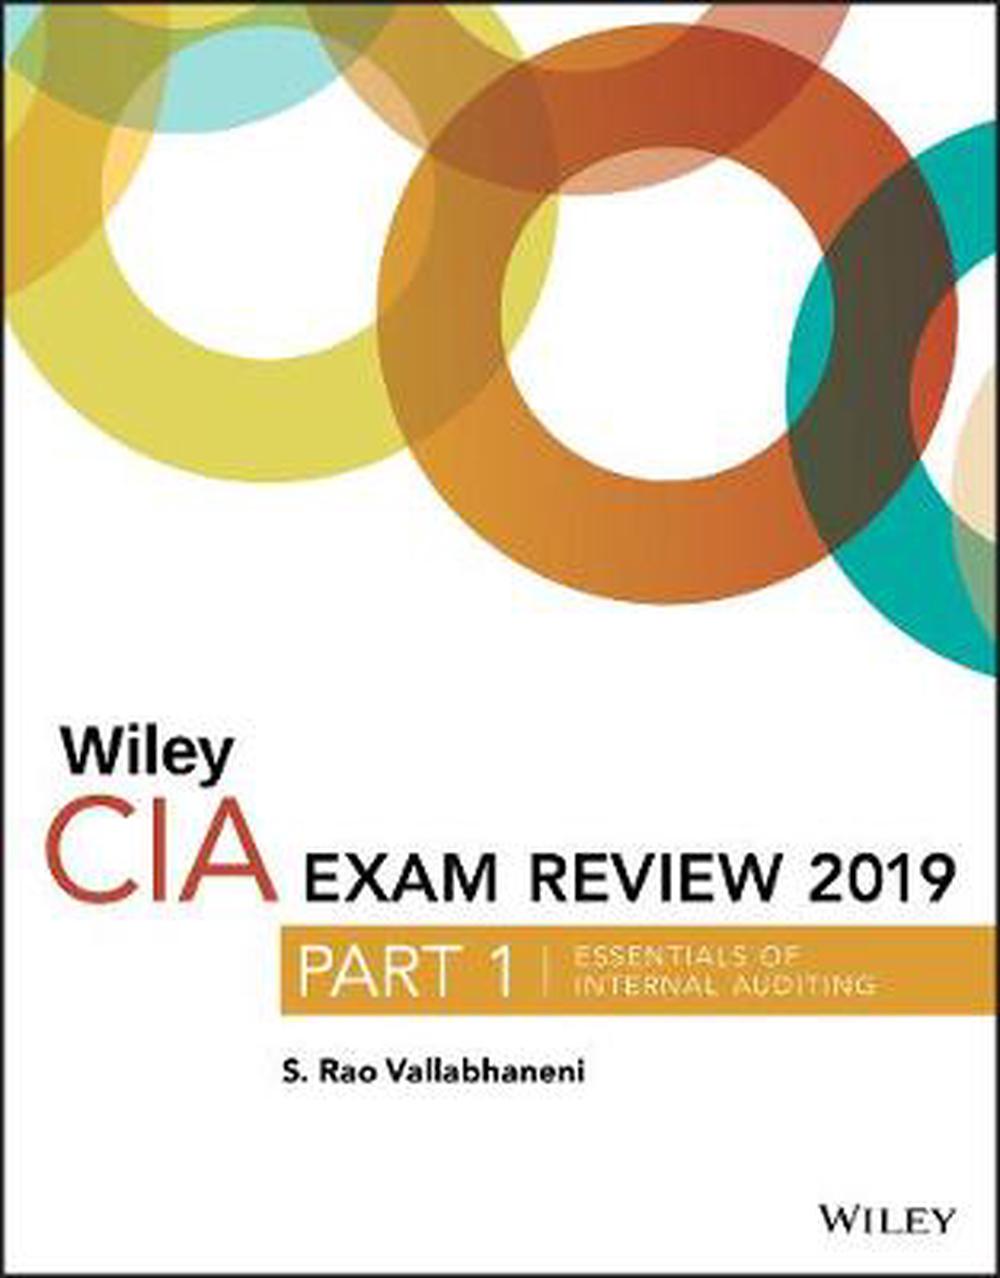 Wiley Cia Exam Review 2019 Part 1 Essentials Of Internal Auditing By